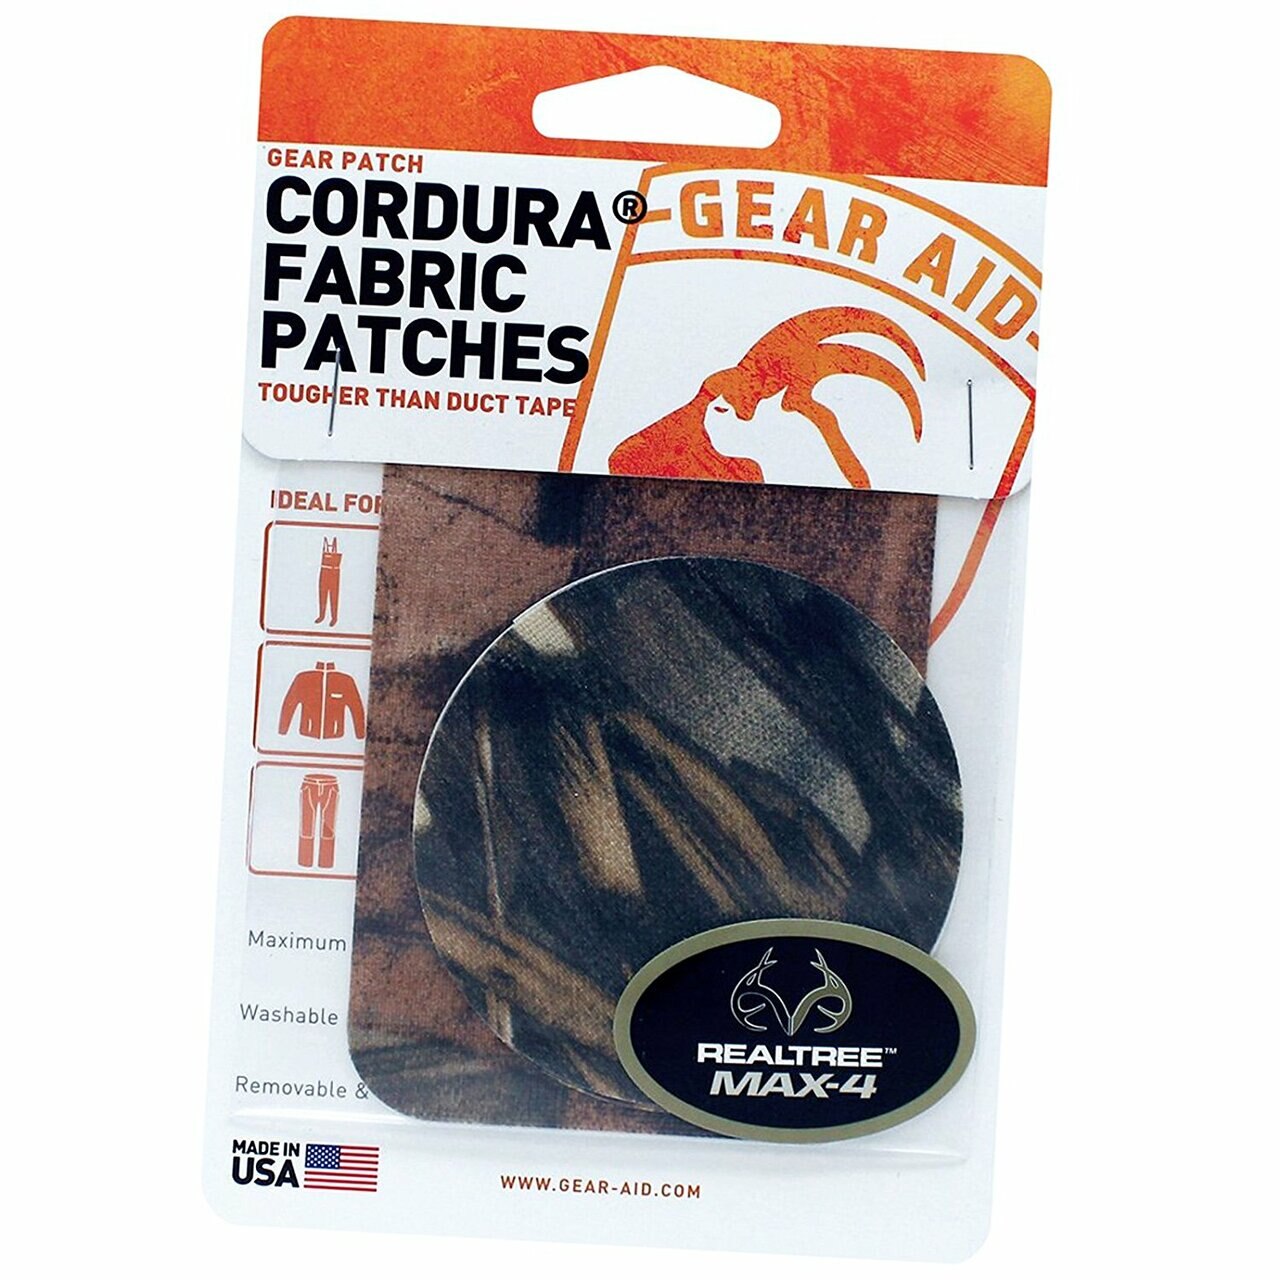 Flex Patch - Tenacious Tape®- Inflatables and Boot Tear Repair - Gear